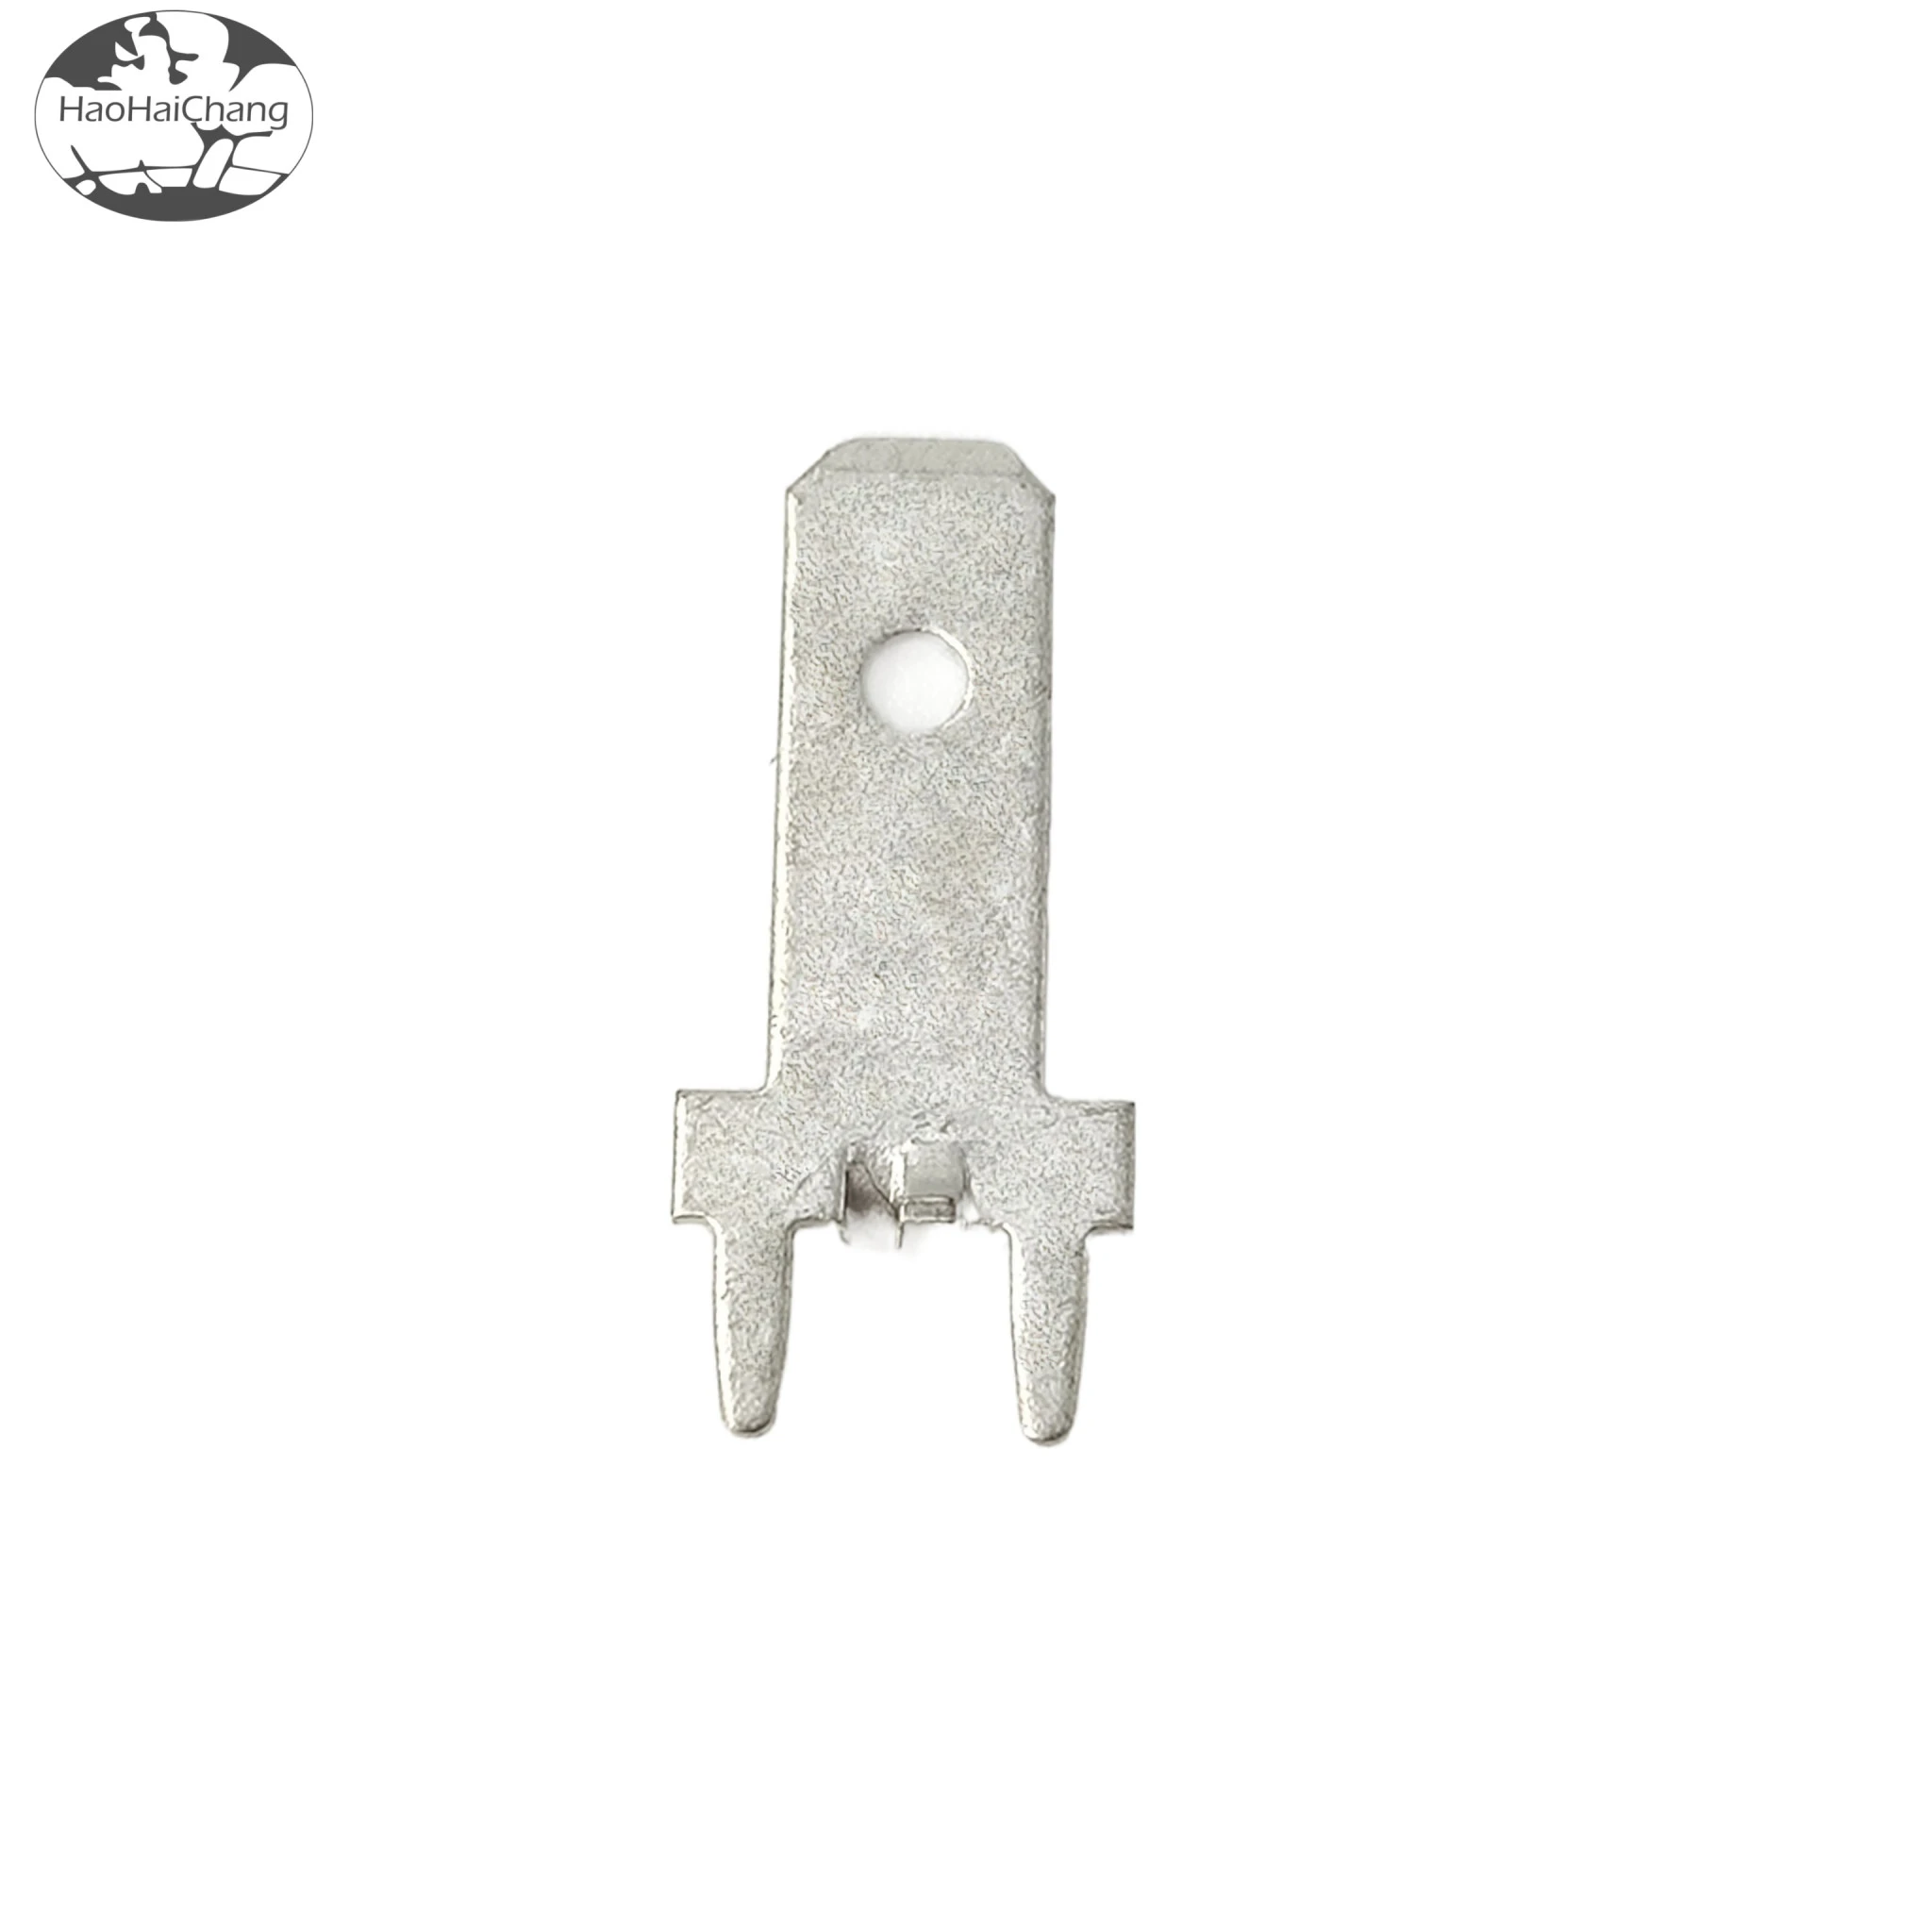 HHC-0128 Connector